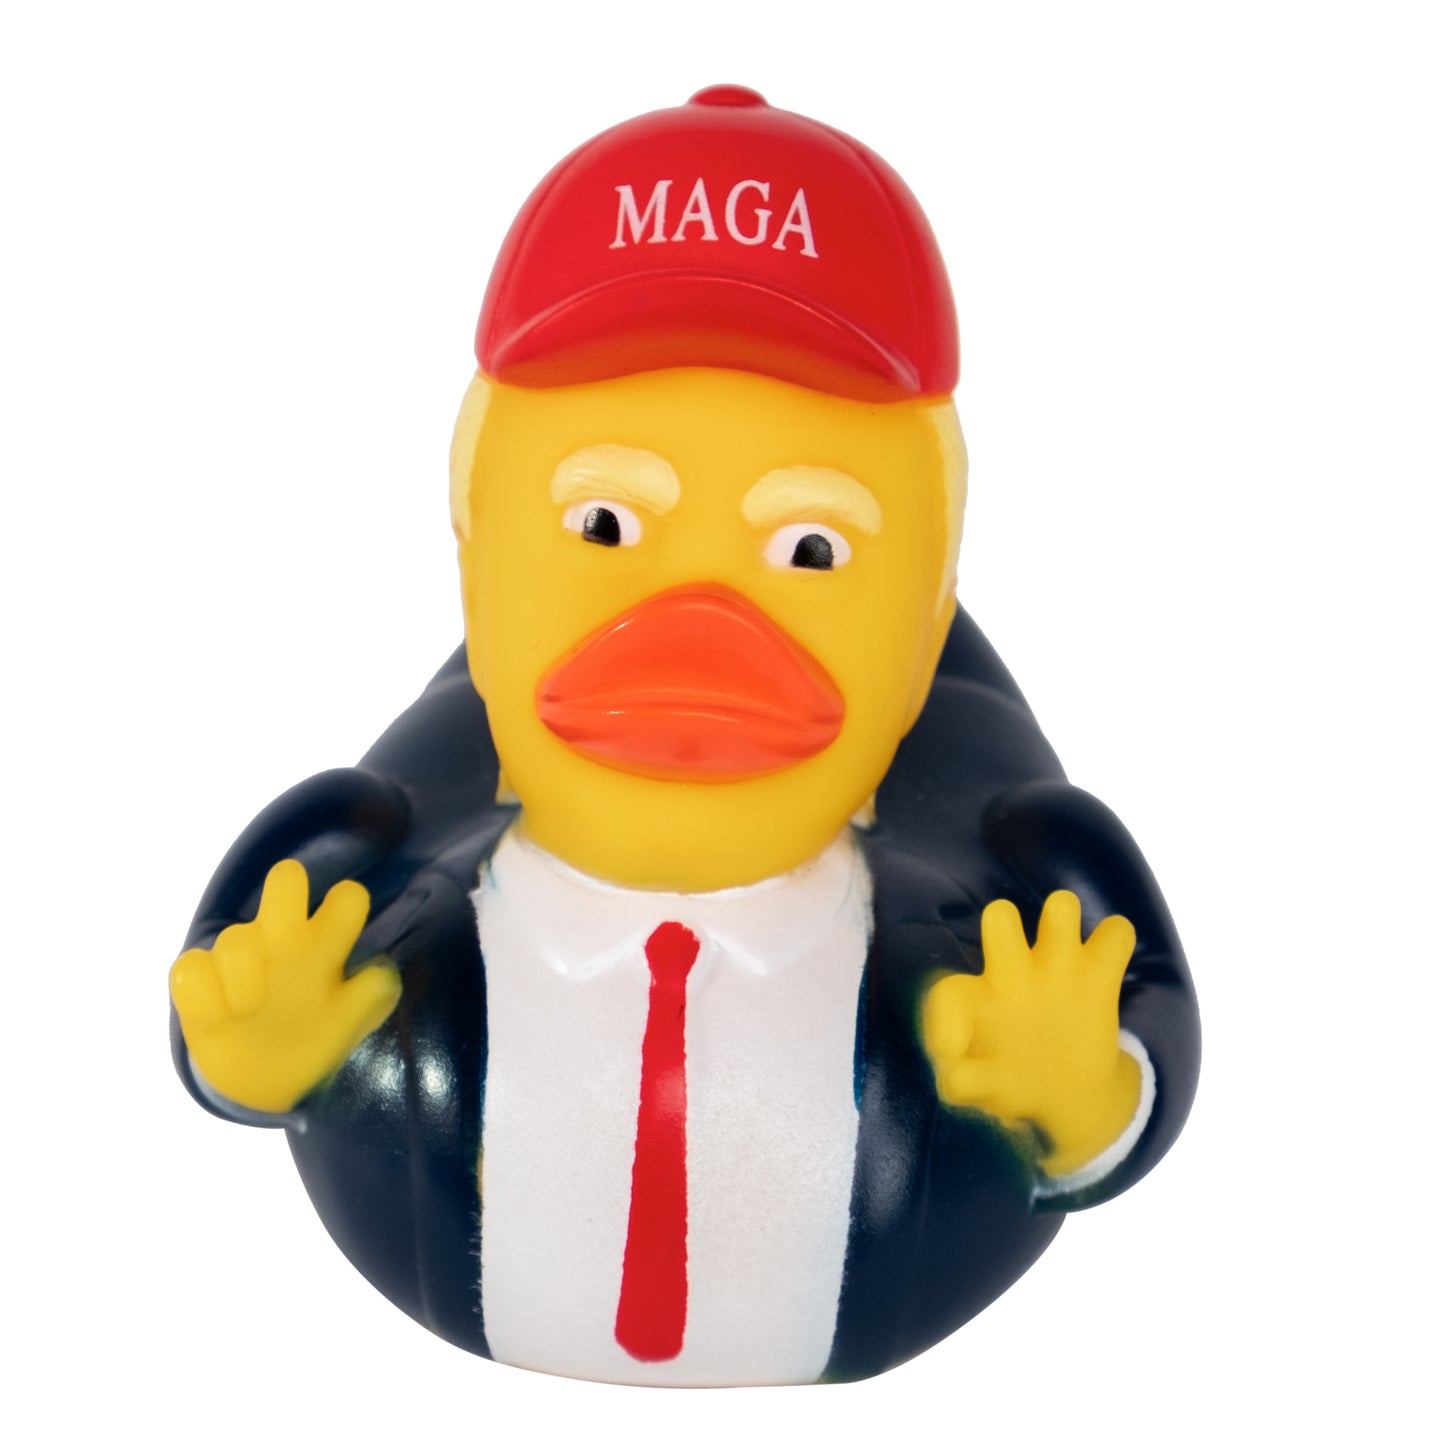 Trump Duck Great for Jeep Ducking Birthdays Funny Collector's Gift